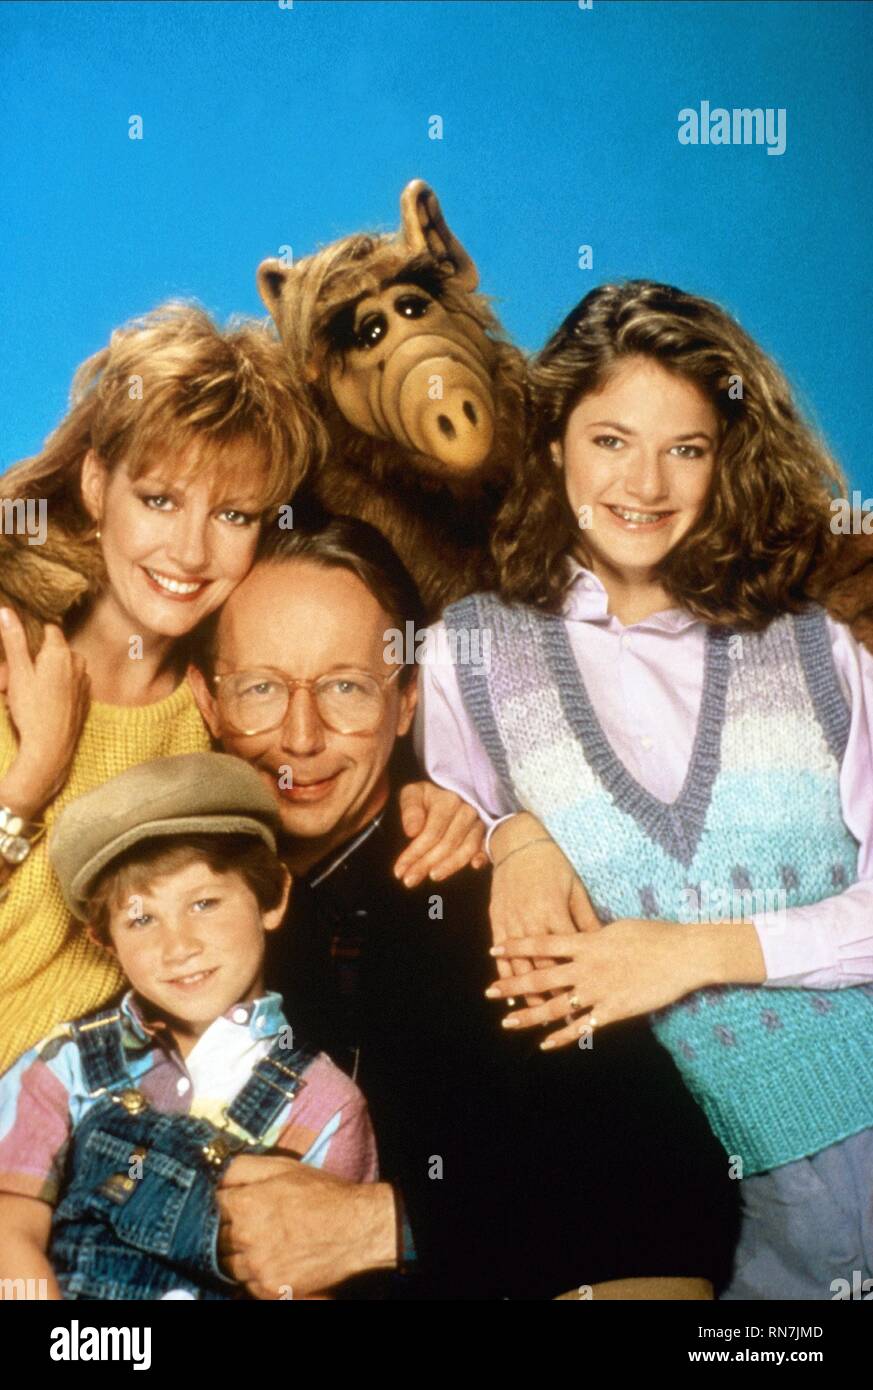 ALF, MAX WRIGHT, ANNE SCHEDEEN, ANDREA ELSON,BENJI GREGORY, ALF, 1986 Stock Photo